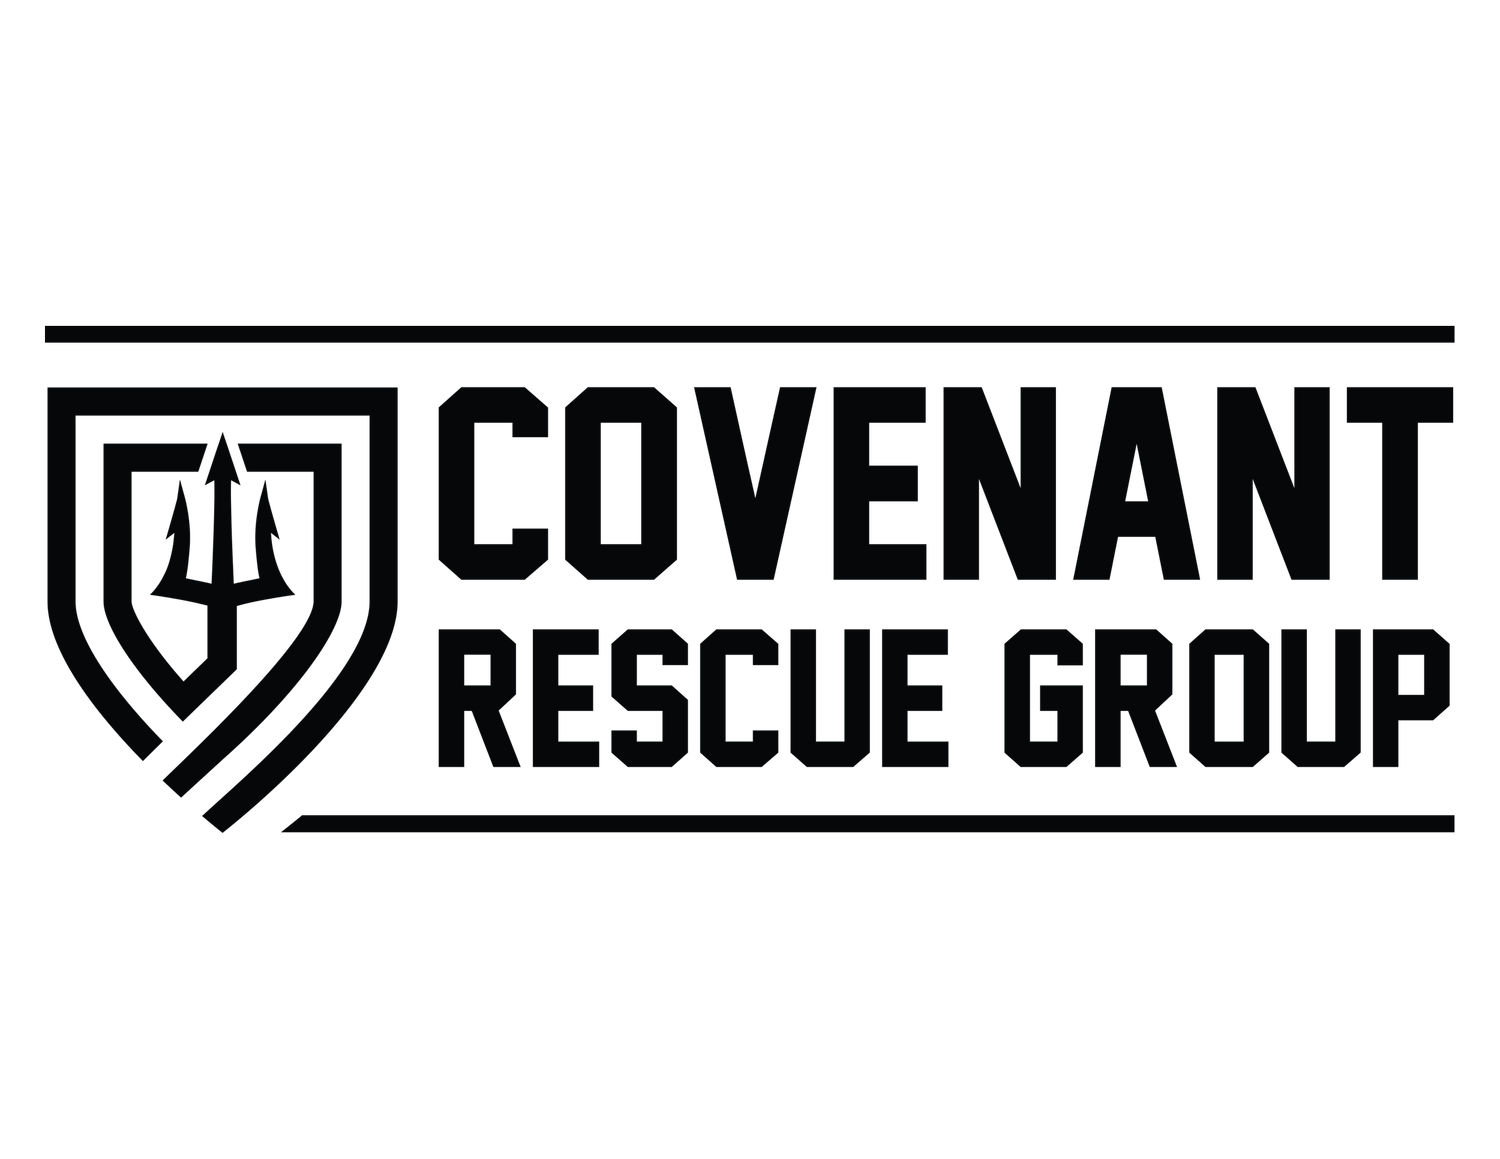 Covenant Rescue Group